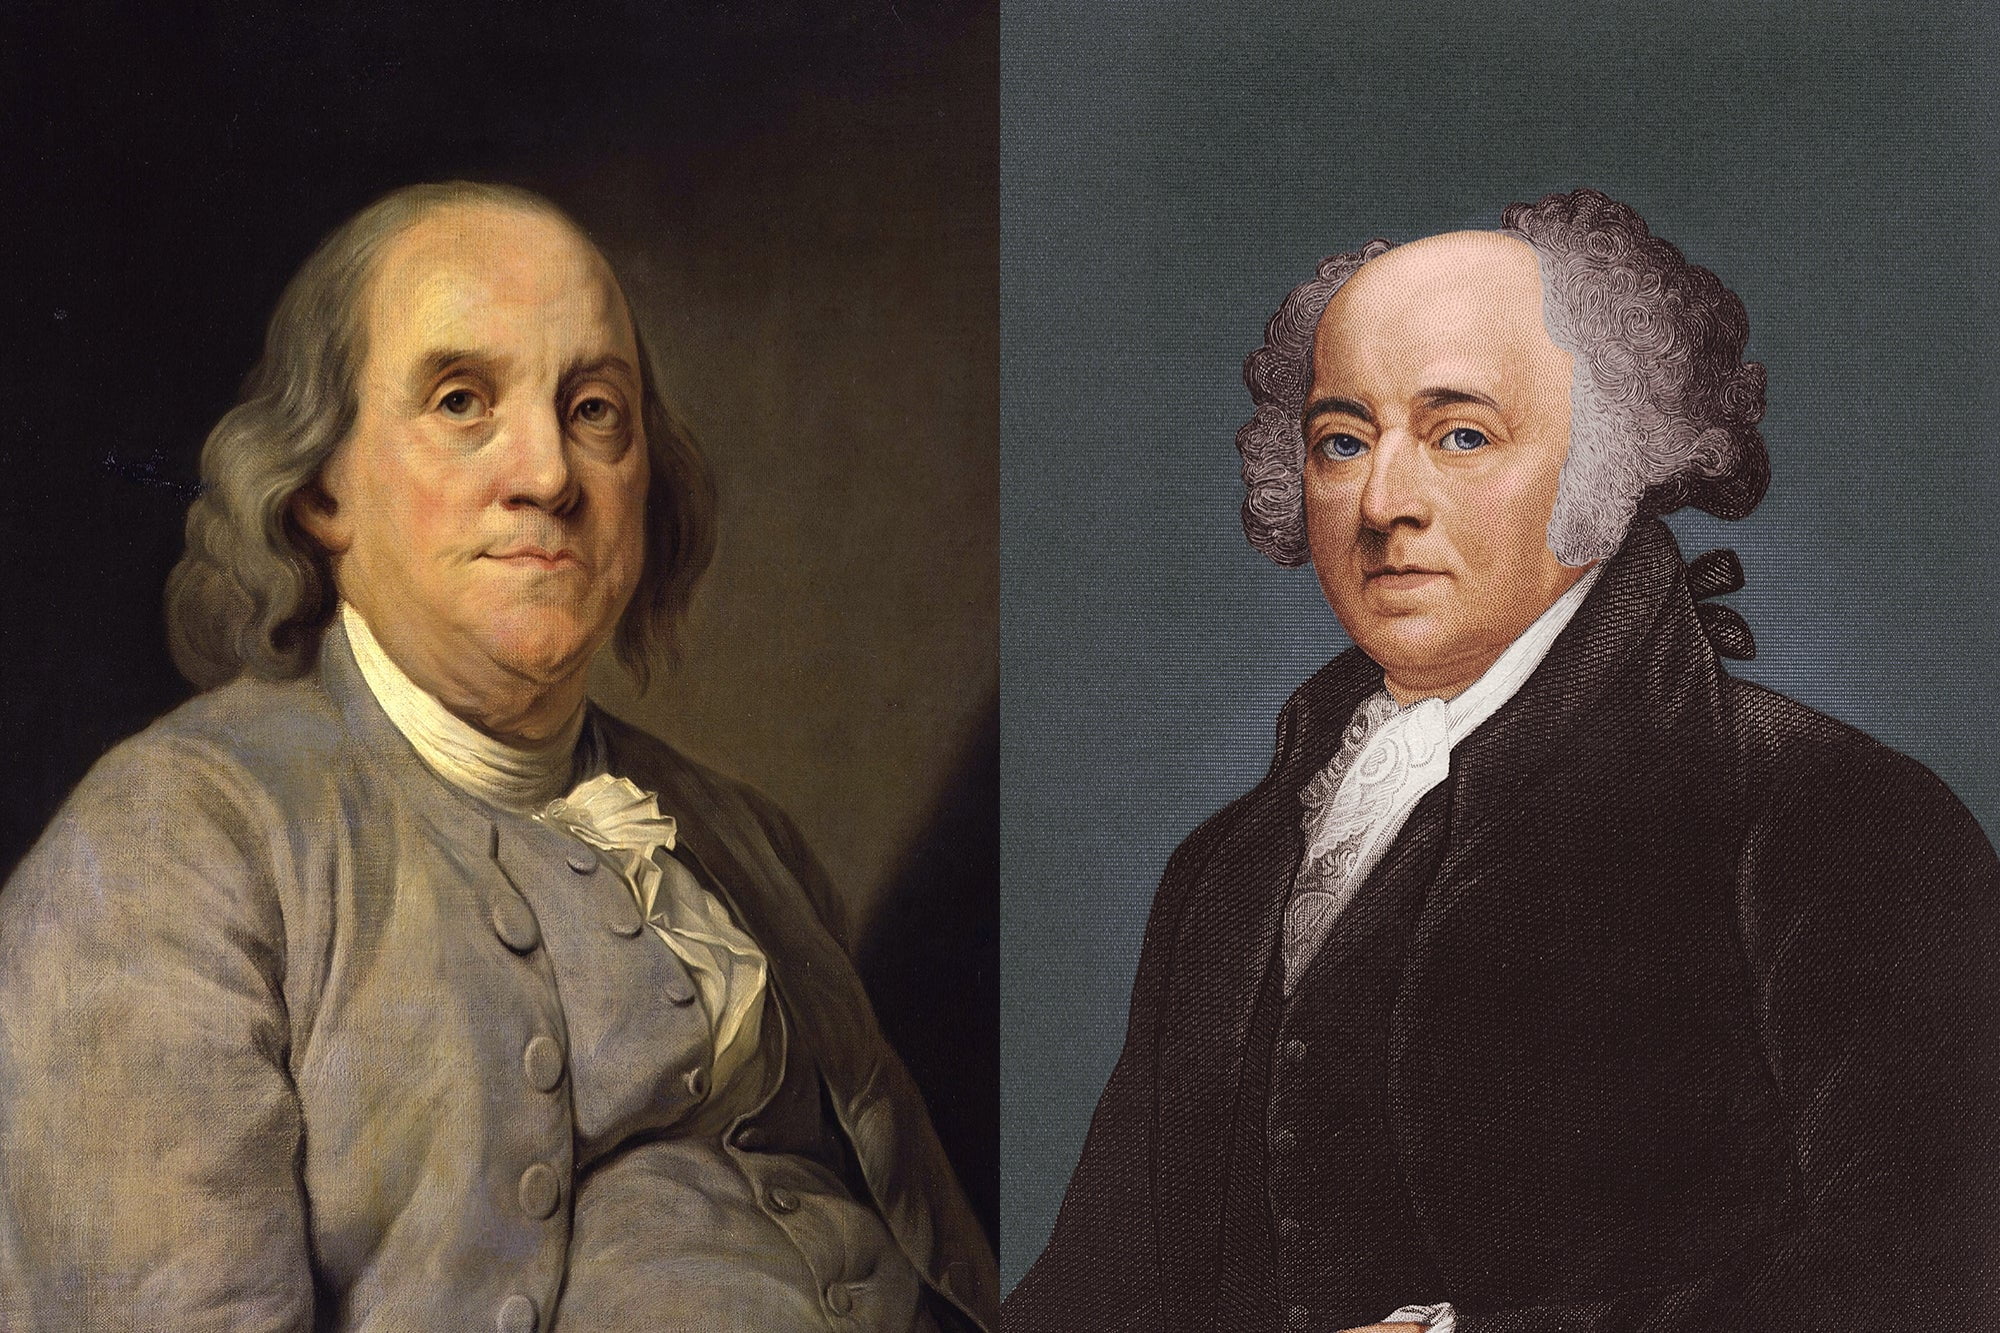 That Time Ben Franklin Slept in the Same Bed With John Adams